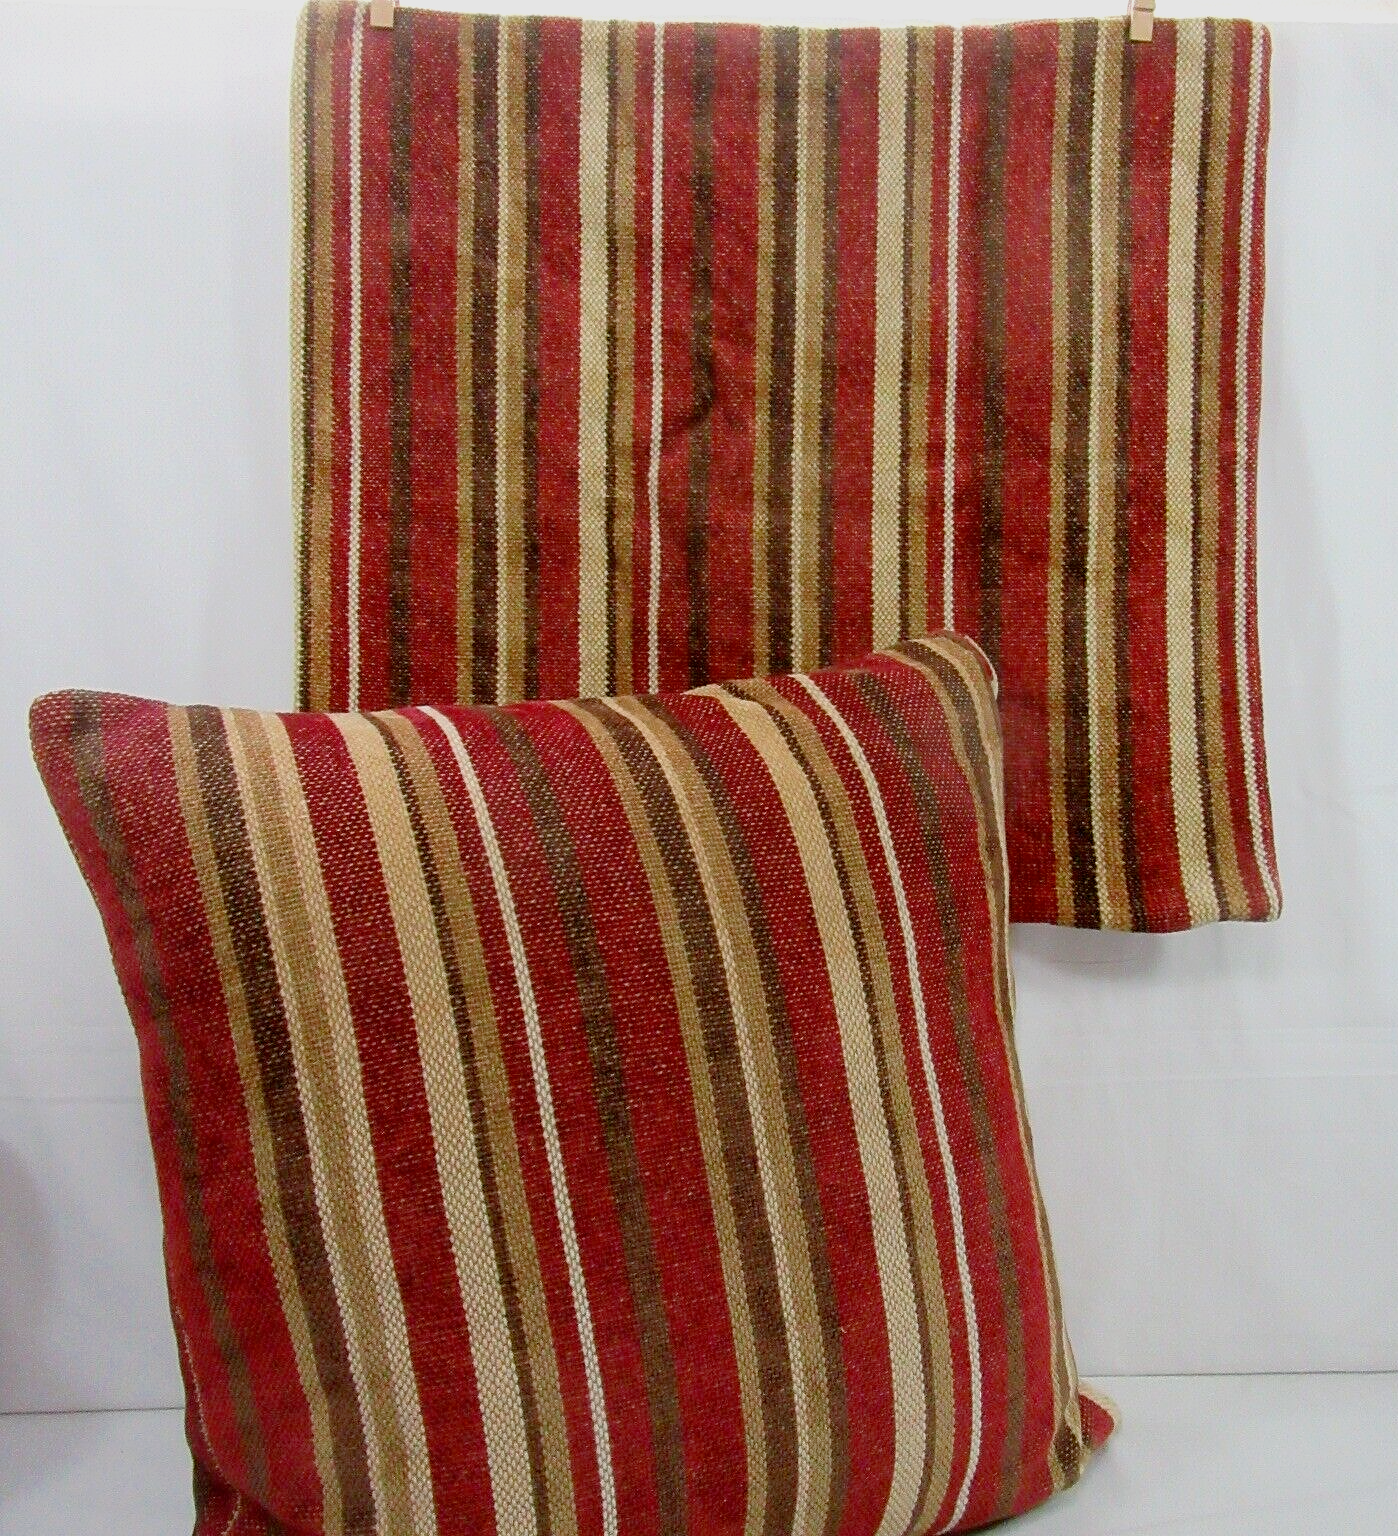 Restoration Hardware Chenille Multistripe Red 20-inch Square Pillow and Cover - $78.00